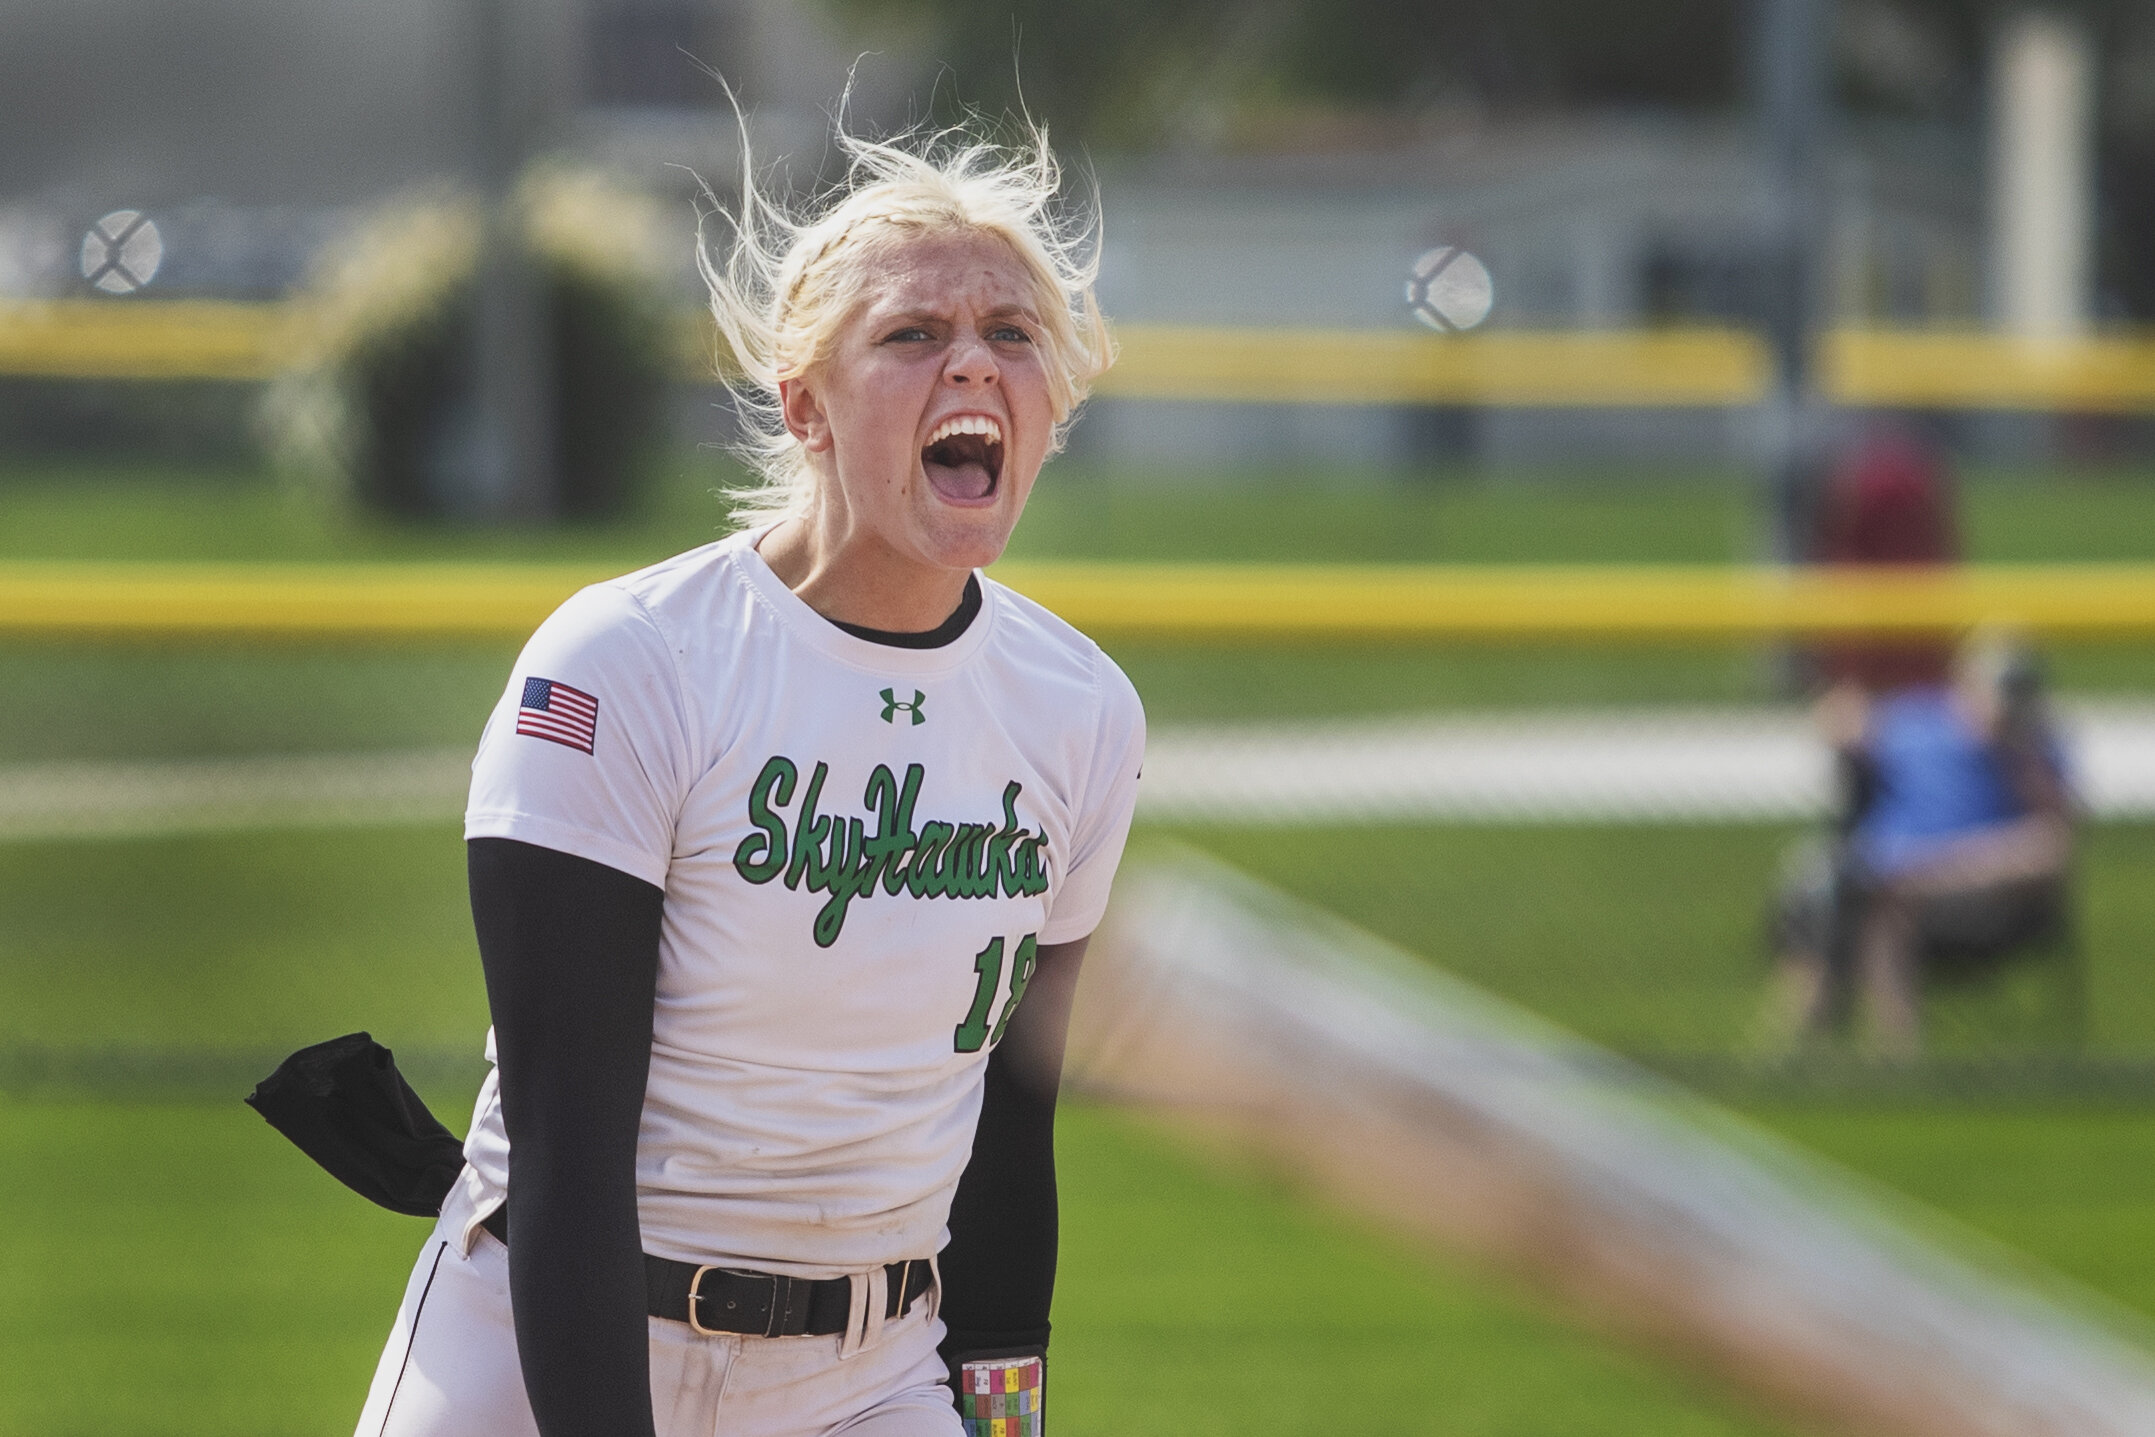  Omaha Skutt pitcher Ruby Meylan (18) celebrates striking out the final Lincoln East batter in the first overtime inning during the Southeast Invitational at the Doris Bair Sports Complex on Saturday, September 26, 2020, in Lincoln, Nebraska. KENNETH